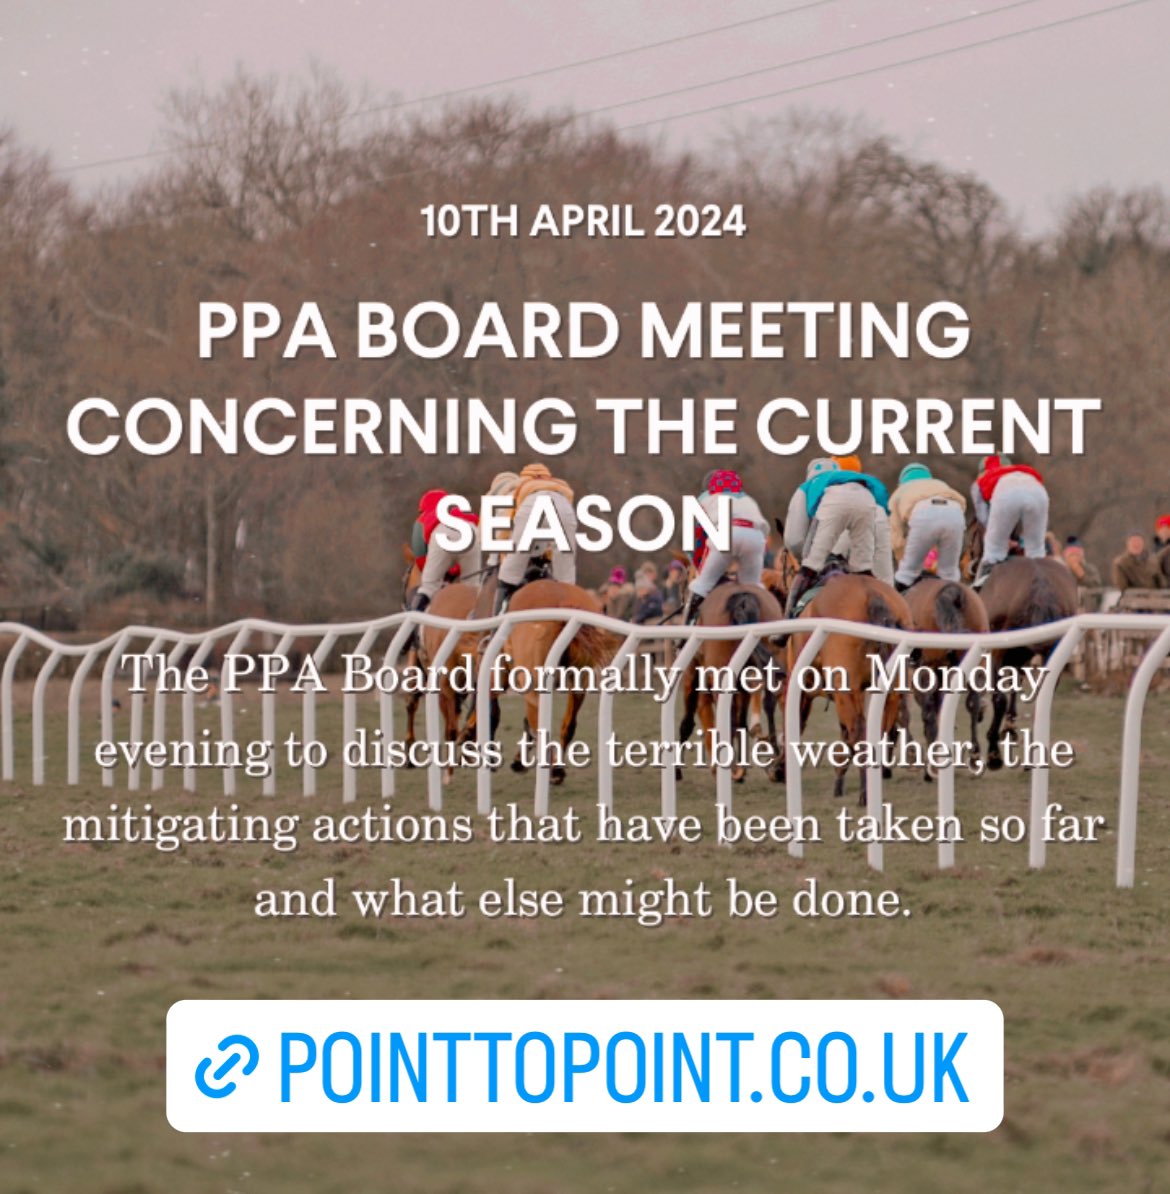 The PPA Board formally met on Monday evening to discuss the terrible weather, the mitigating actions that have been taken so far and what else might be done. pointtopoint.co.uk/news_articles/… #GoPointing